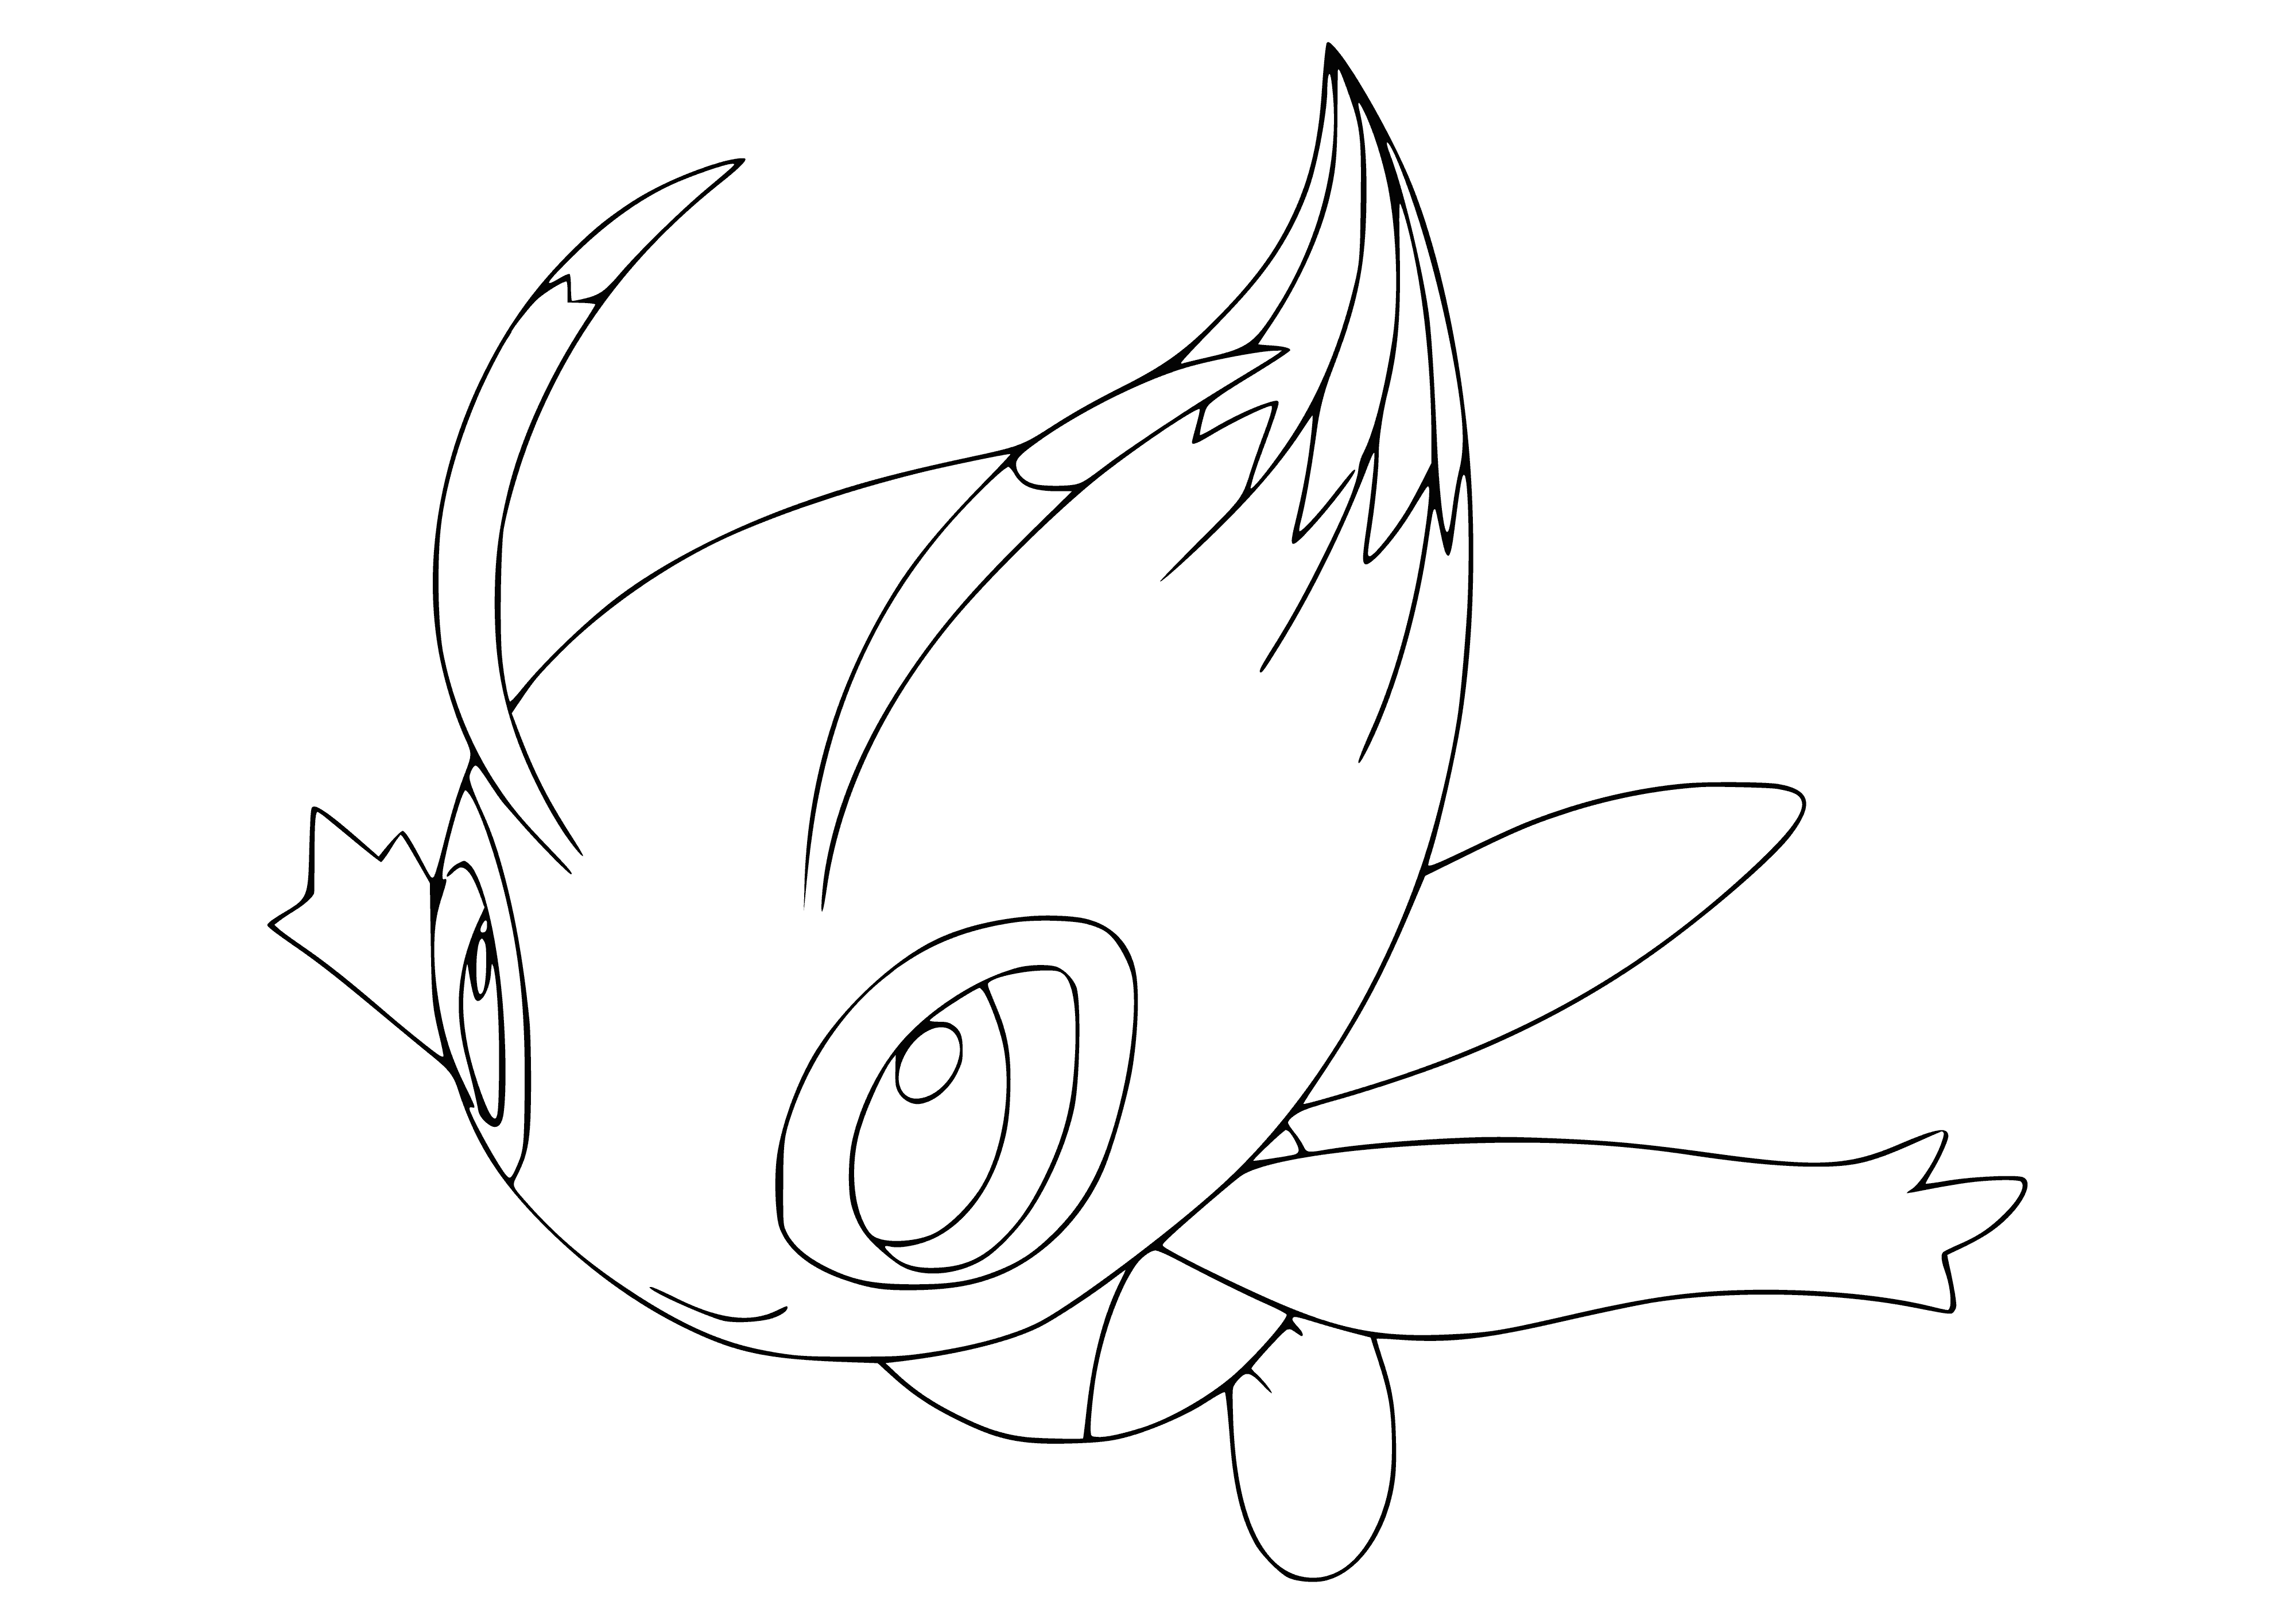 coloring page: Legendary Pokemon Celebi is small, forest-dwelling with blue & green fur; large, pointed ears; big, blue eyes; brown beak & tipped with green tail. Rare & has time-travel ability.